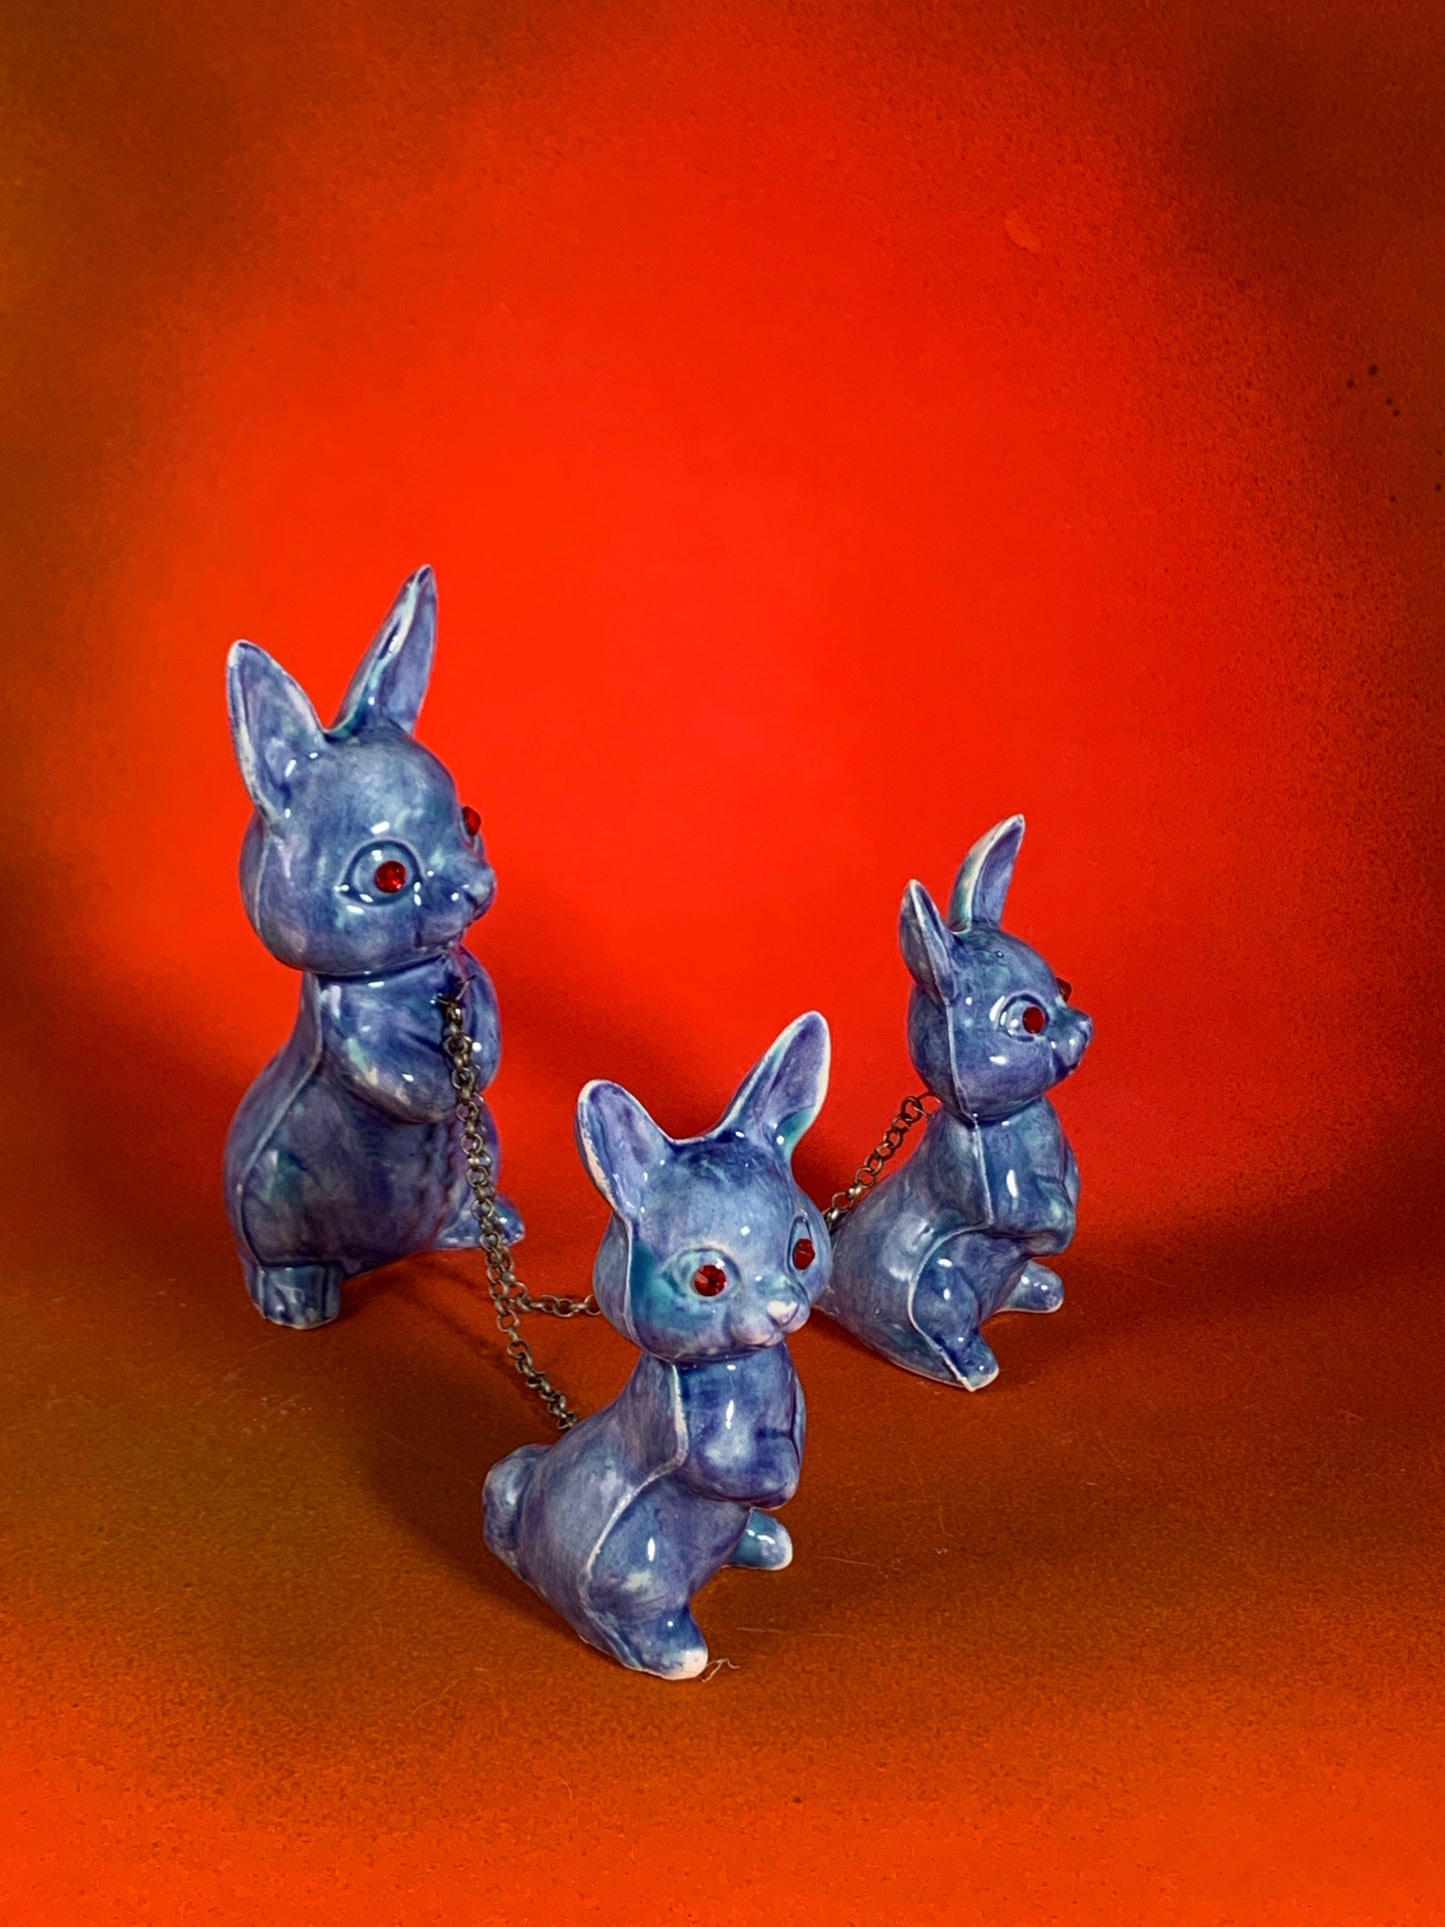 Chained Rabbits